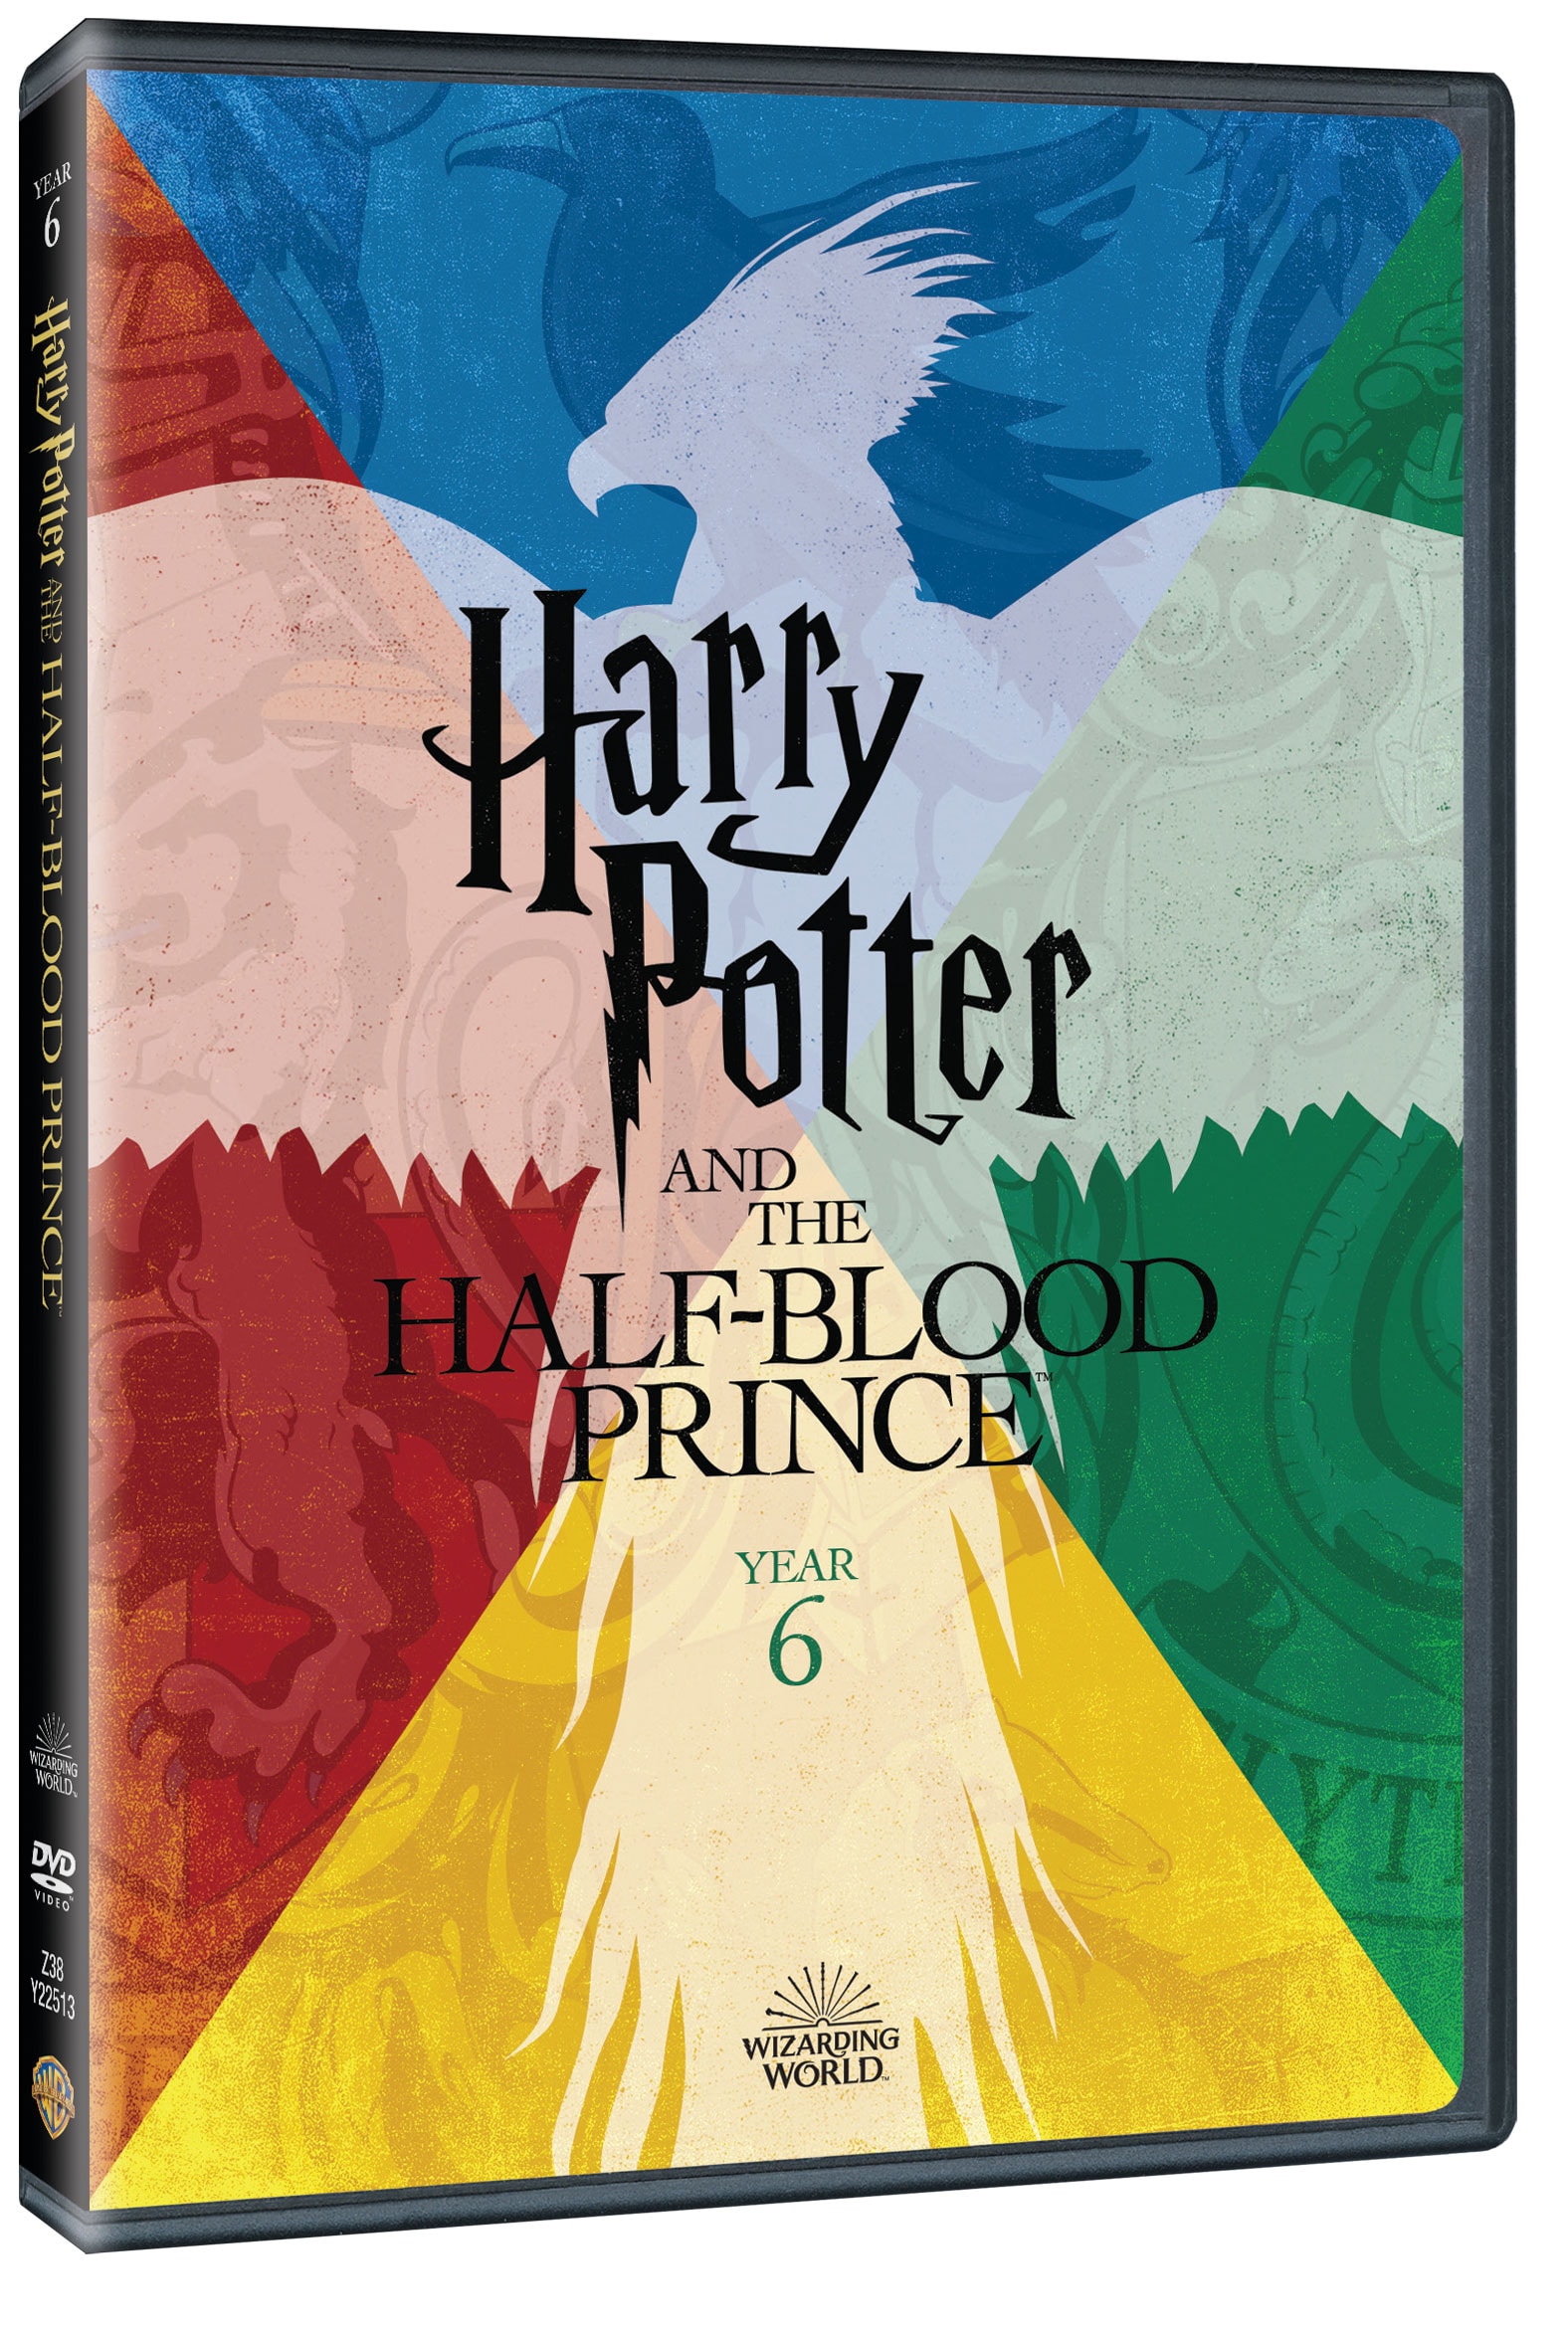 Harry Potter and the Half-Blood Prince free download